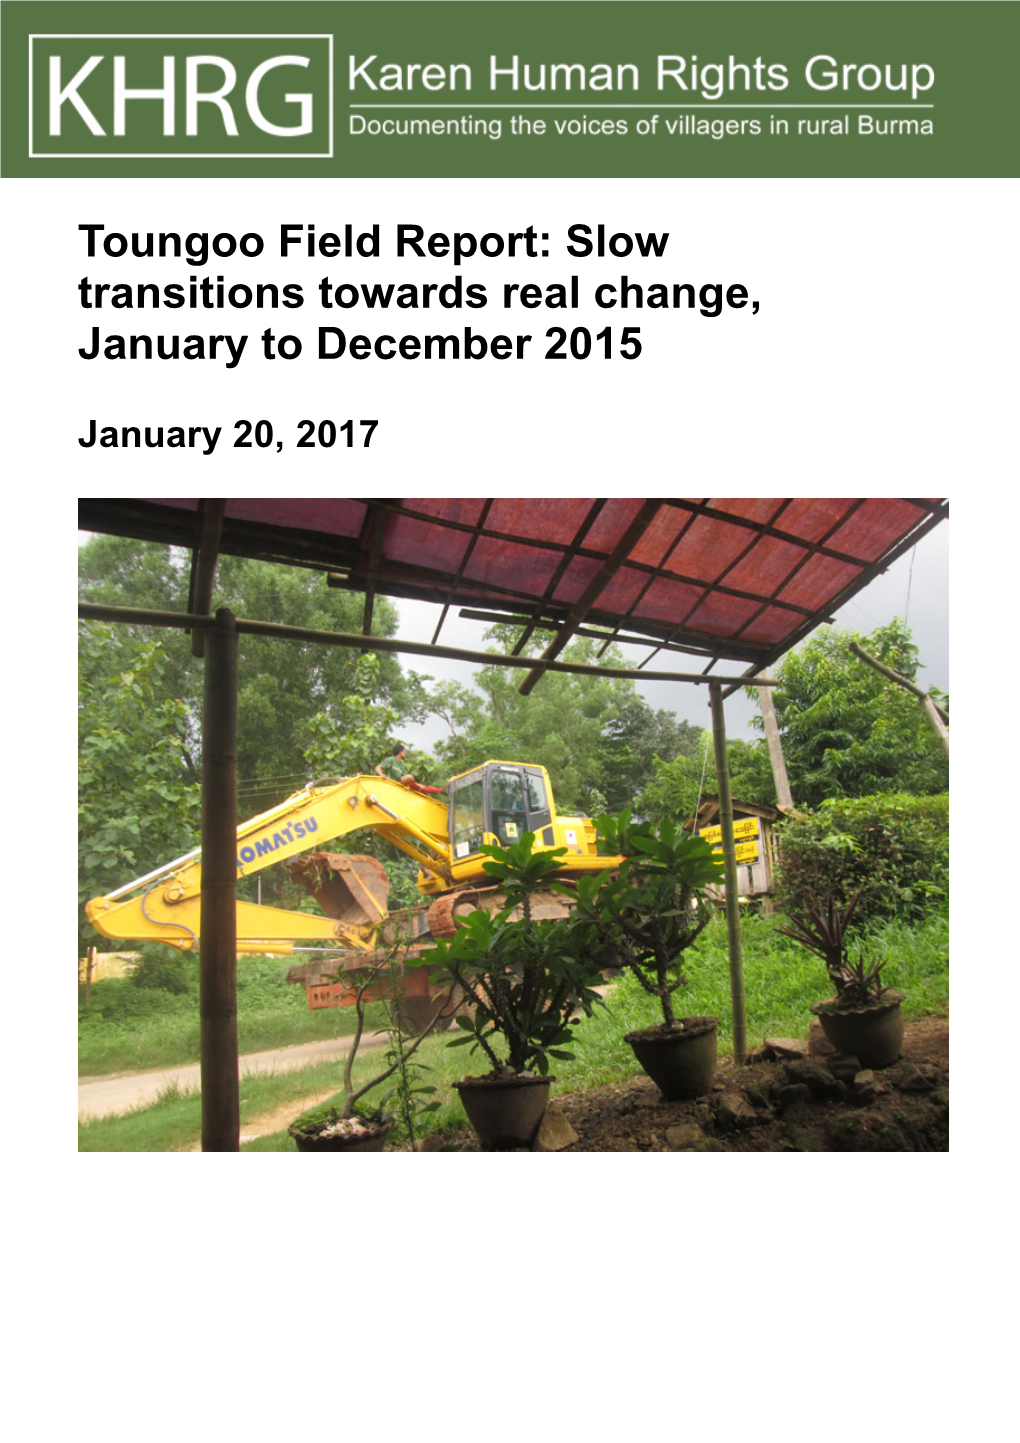 Toungoo Field Report: Slow Transitions Towards Real Change, January to December 2015